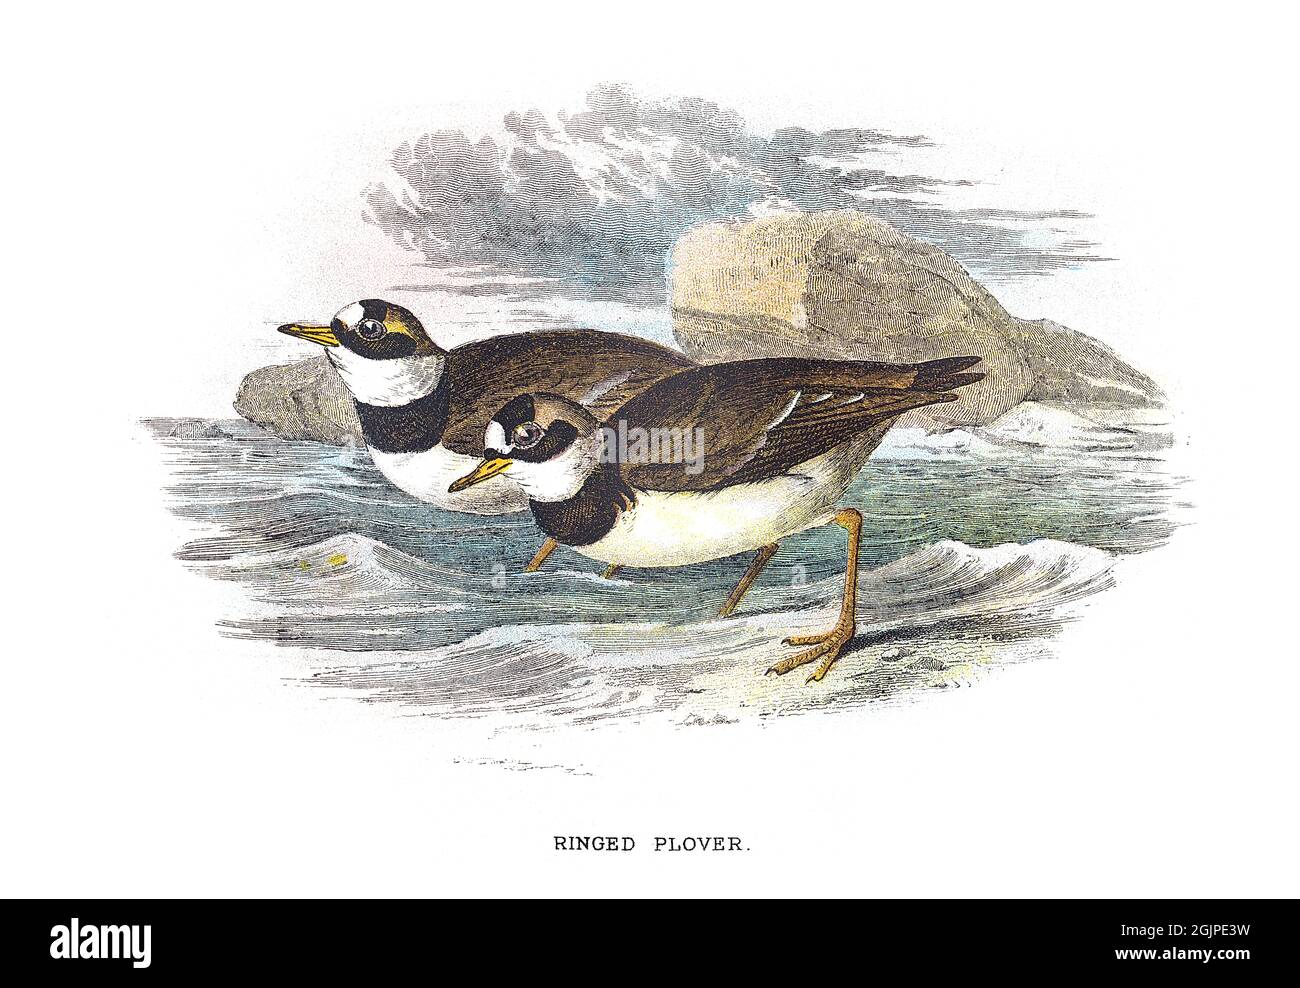 The common ringed plover or ringed plover, Charadrius hiaticula, is a small plover that breeds in Arctic Eurasia. Stock Photo